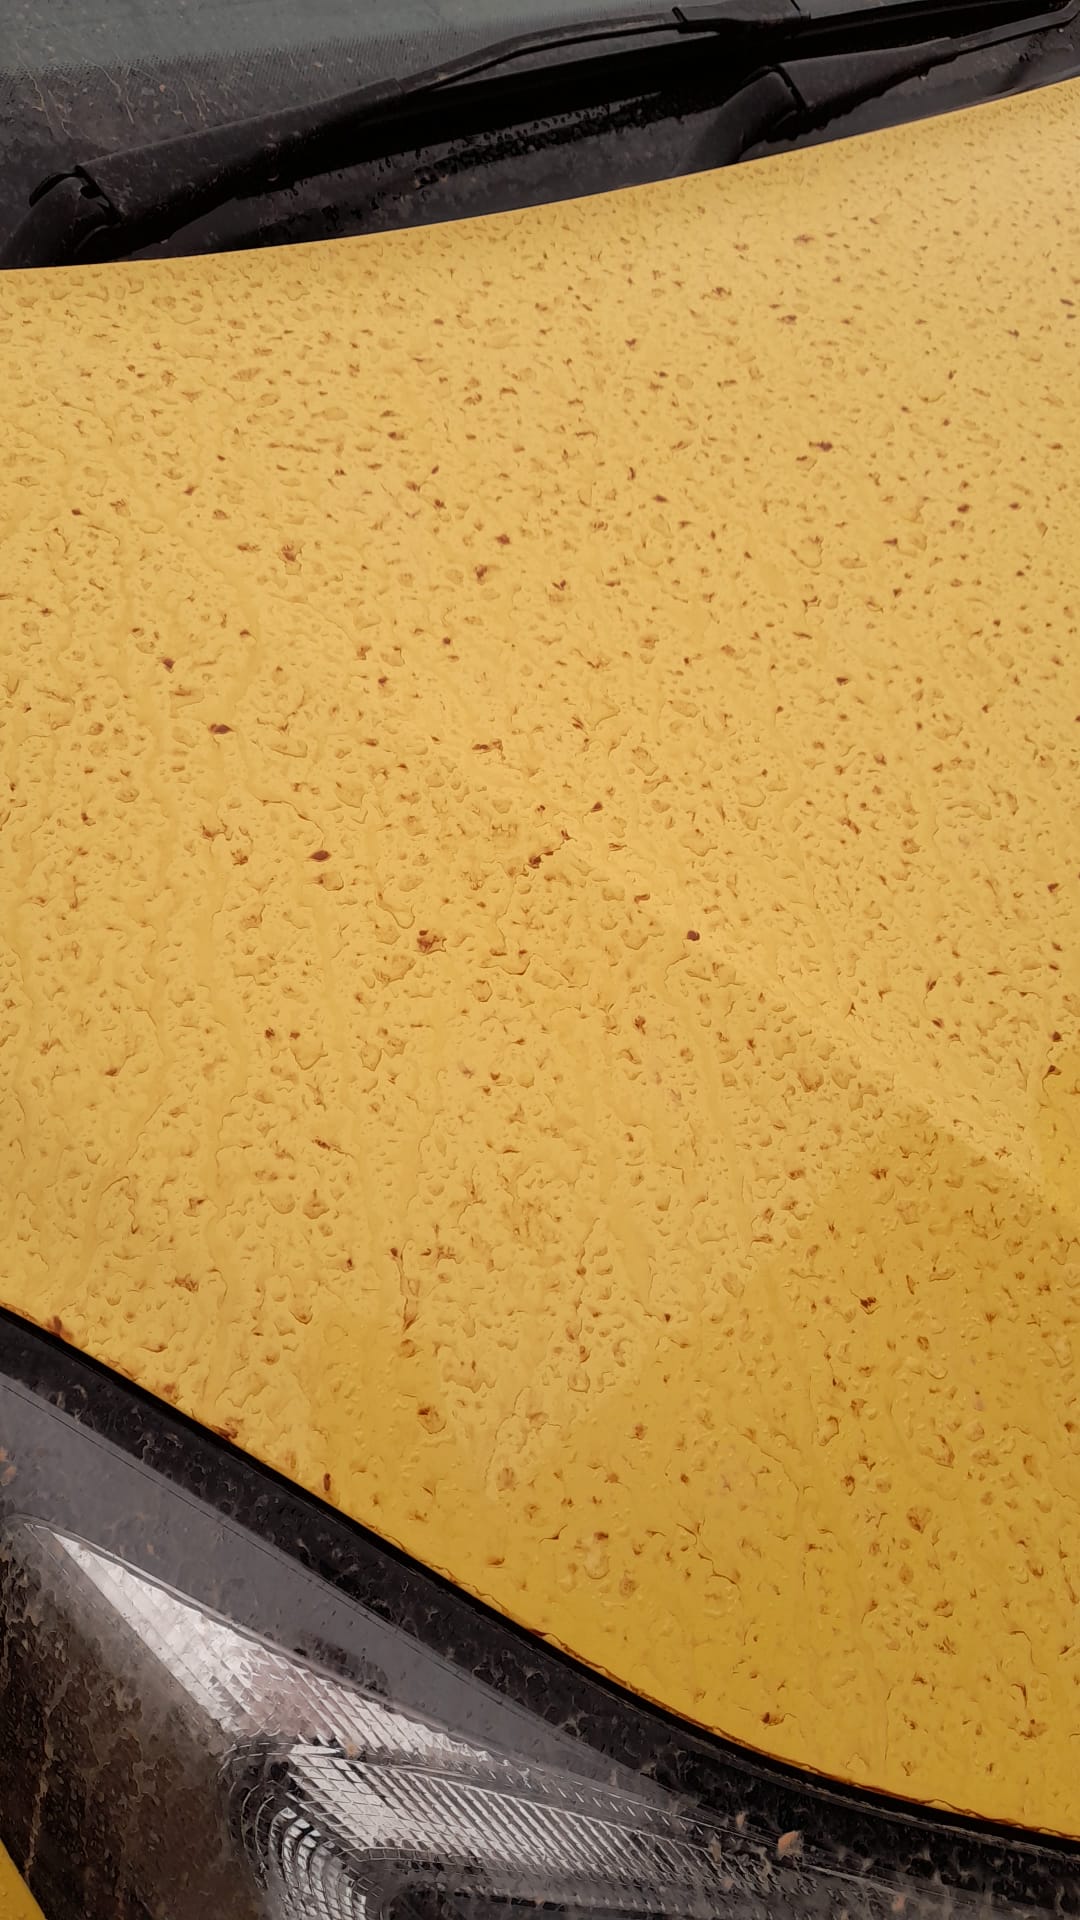 Dust deposits on a yellow car